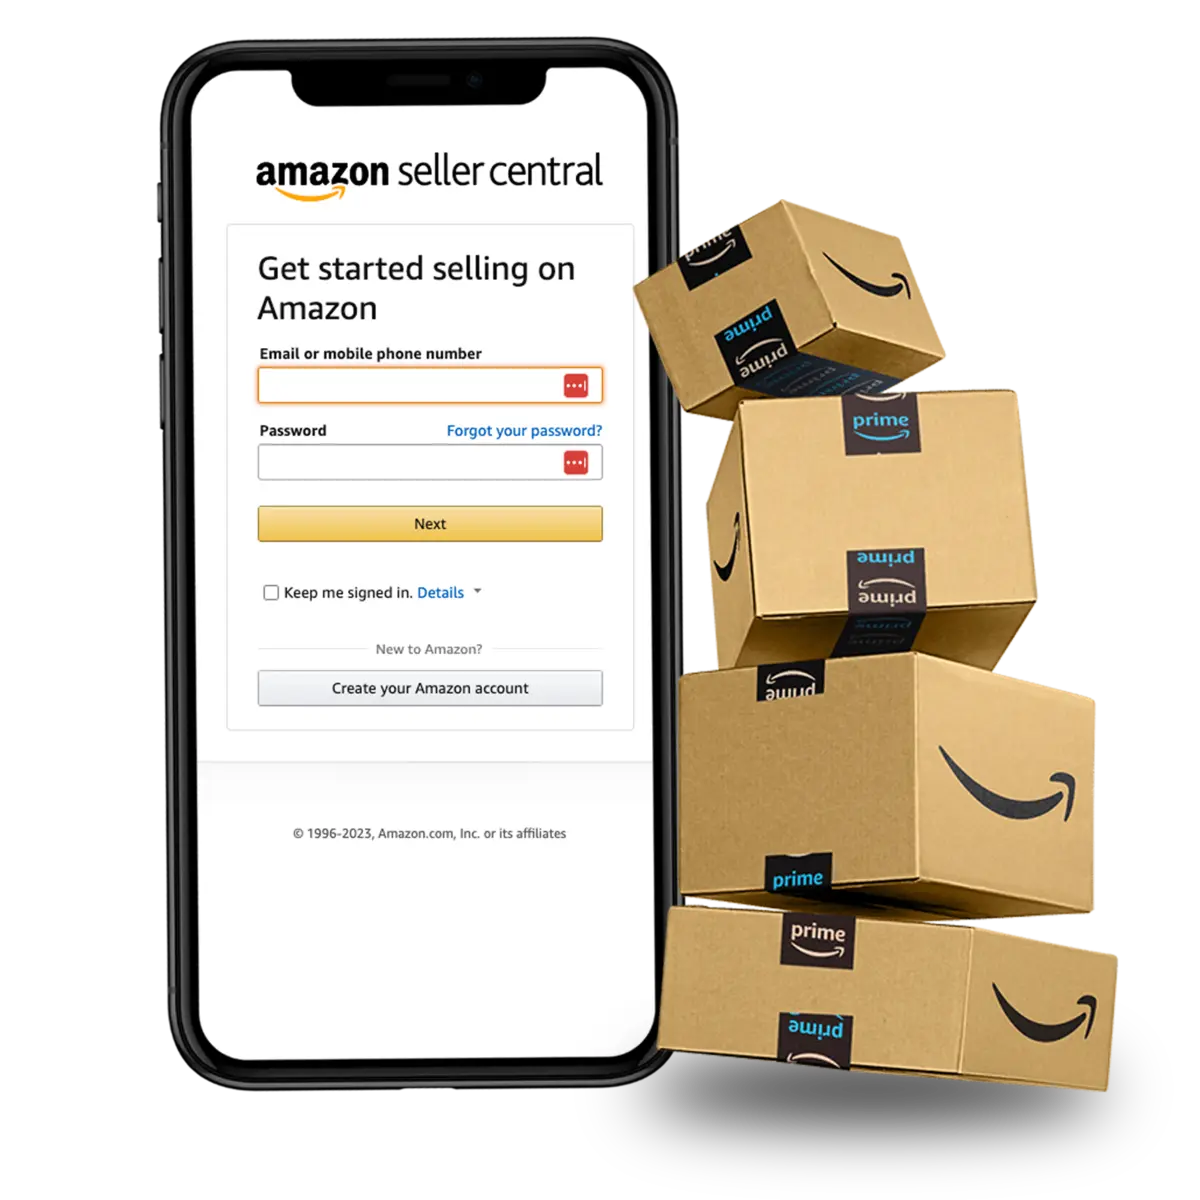 amazon seller central image